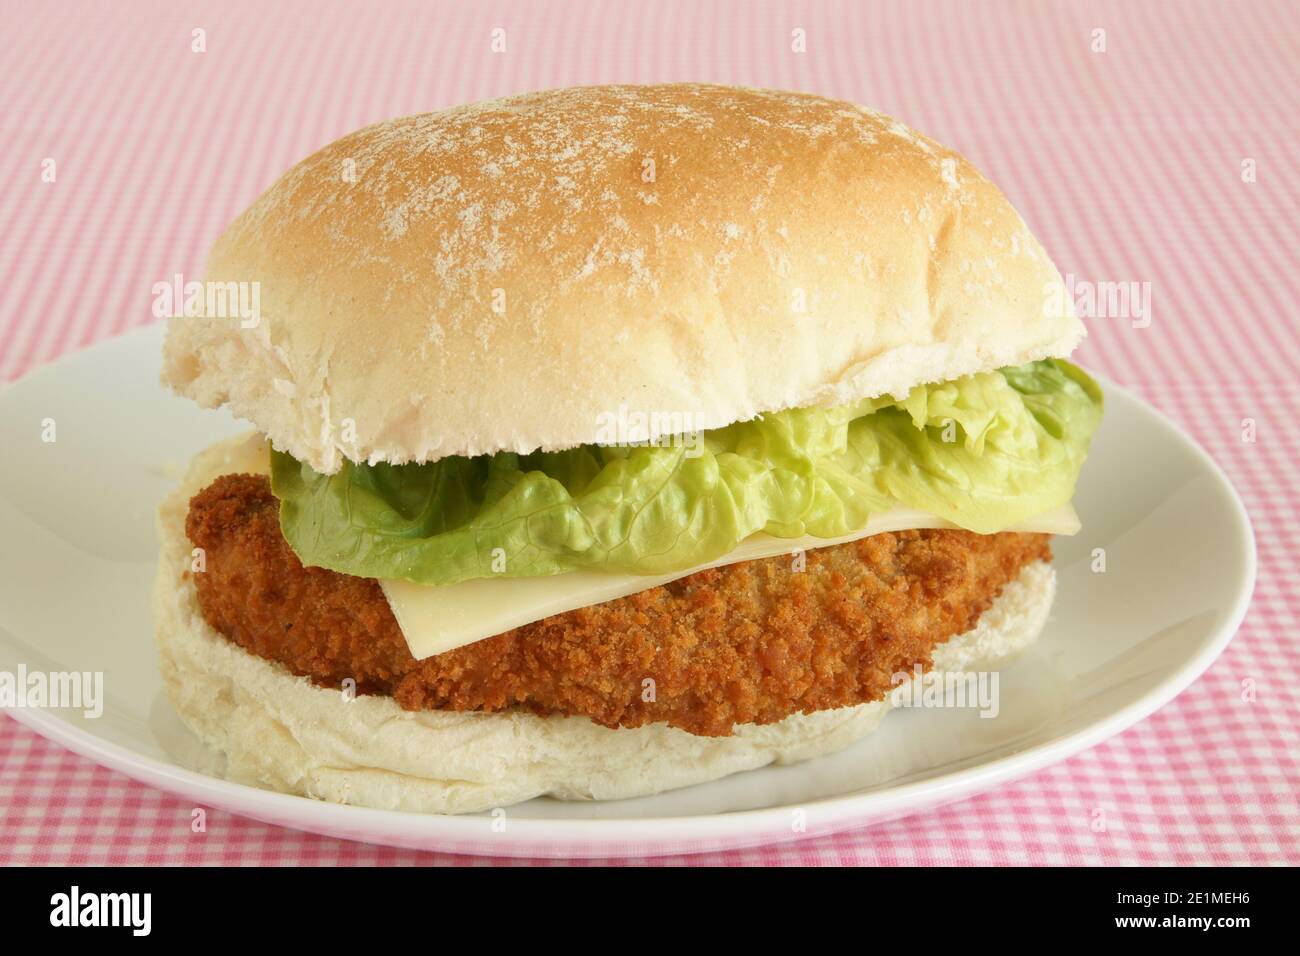 Chicken fillet in a bun with lettuce and cheese Stock Photo